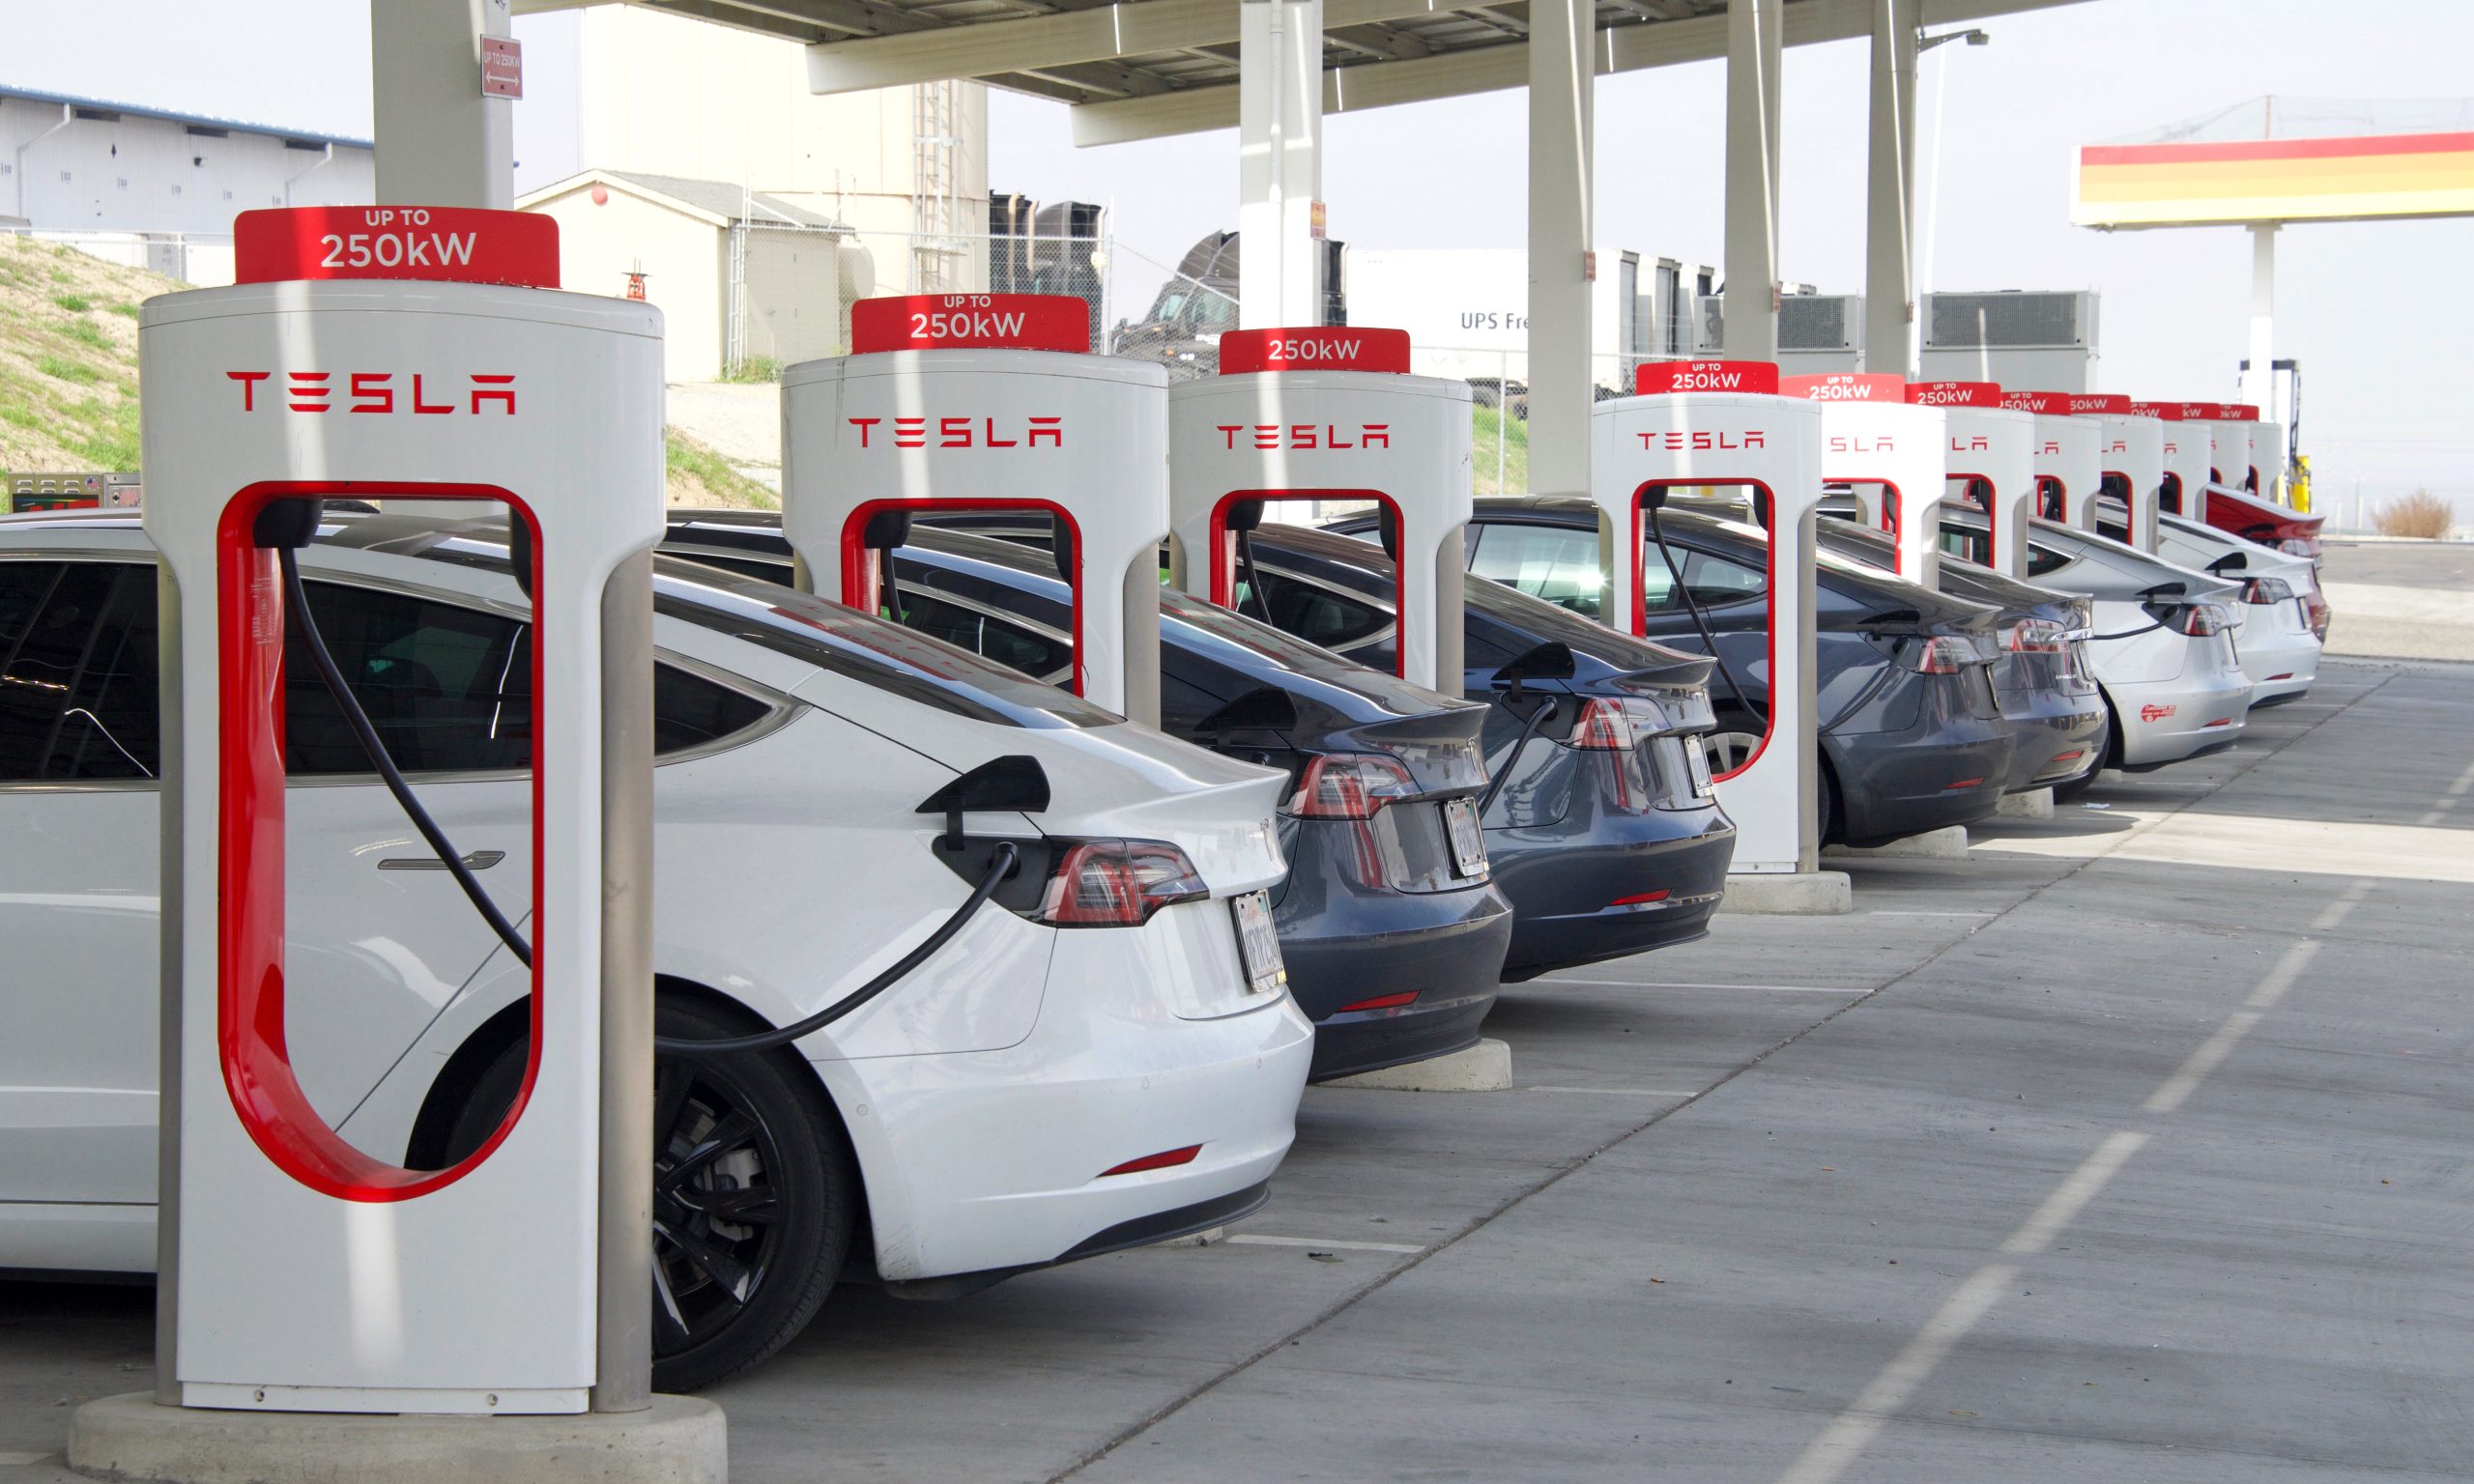 A lawsuit claims Tesla falsely advertised 3 Years’ of free supercharging